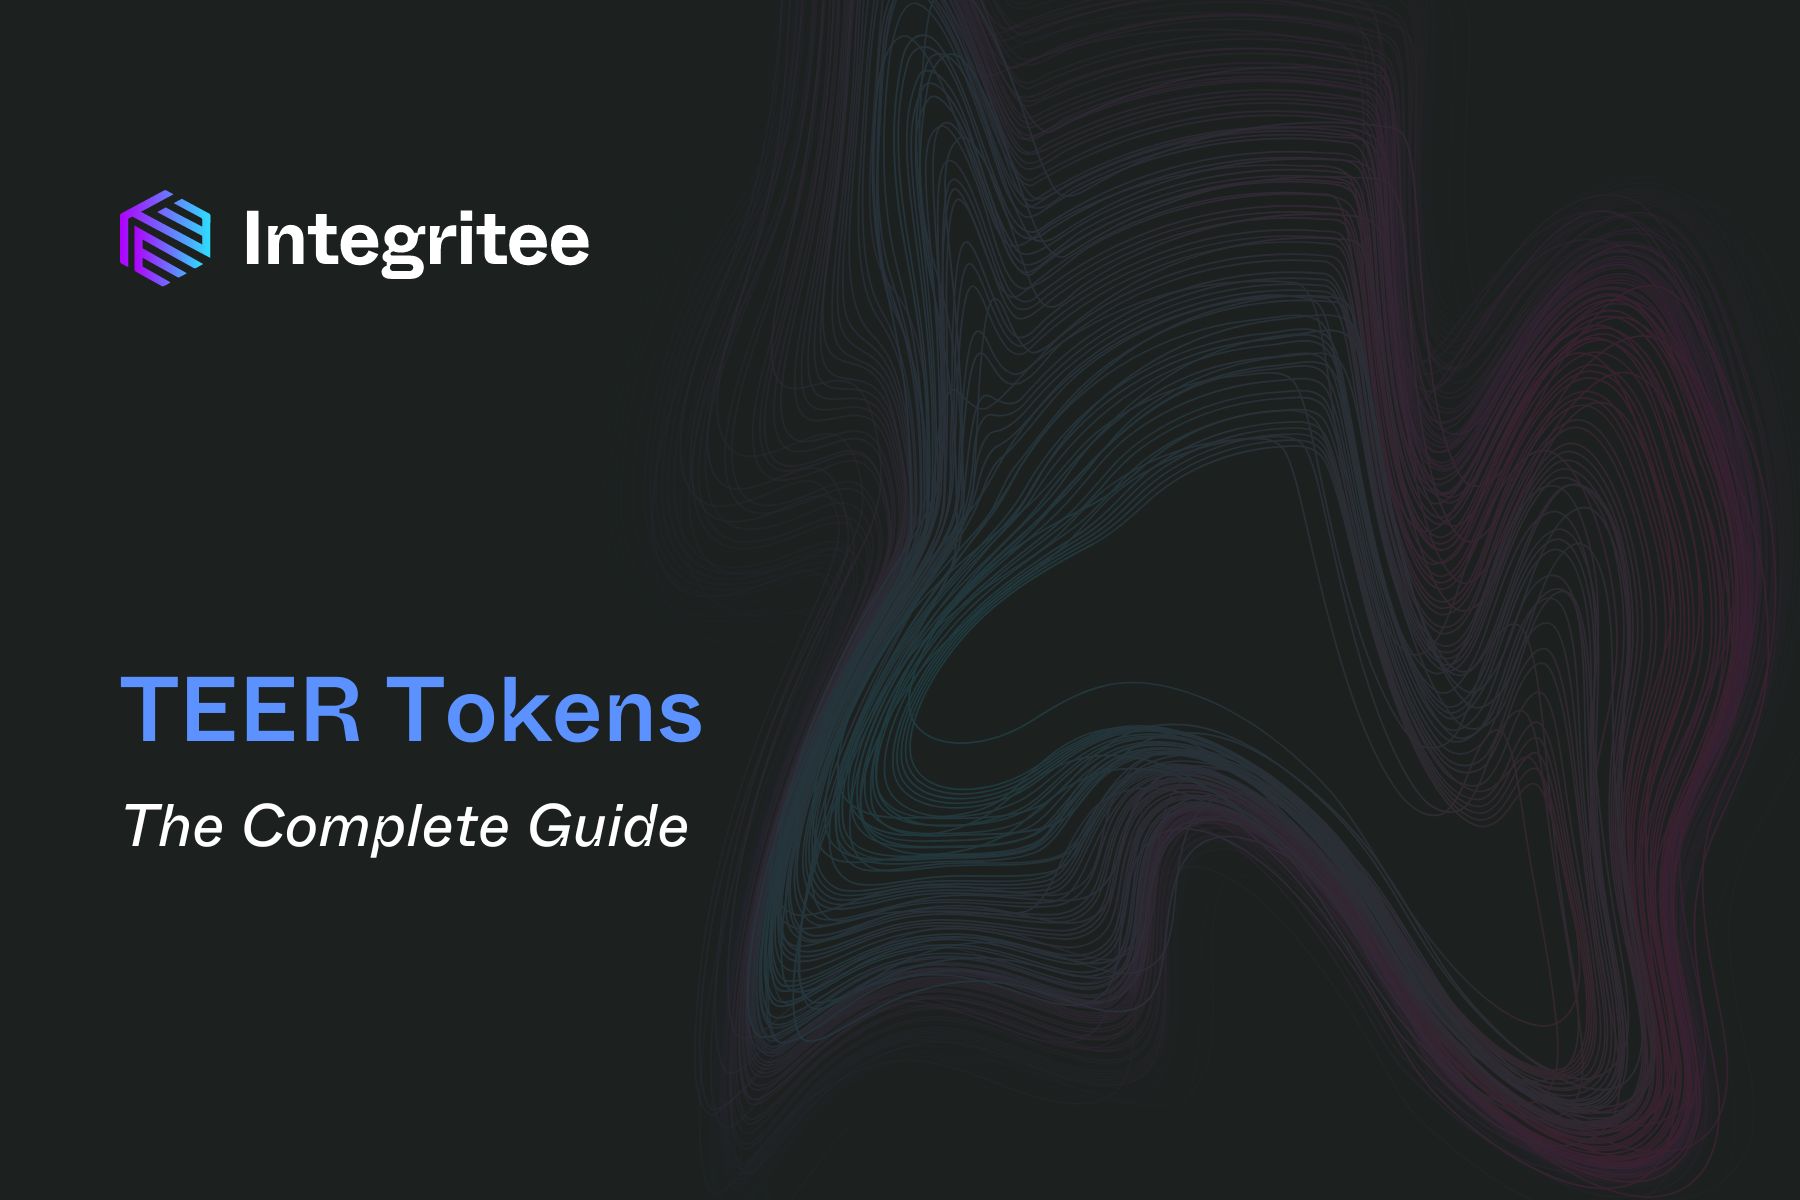 The Complete Guide to TEER Tokens